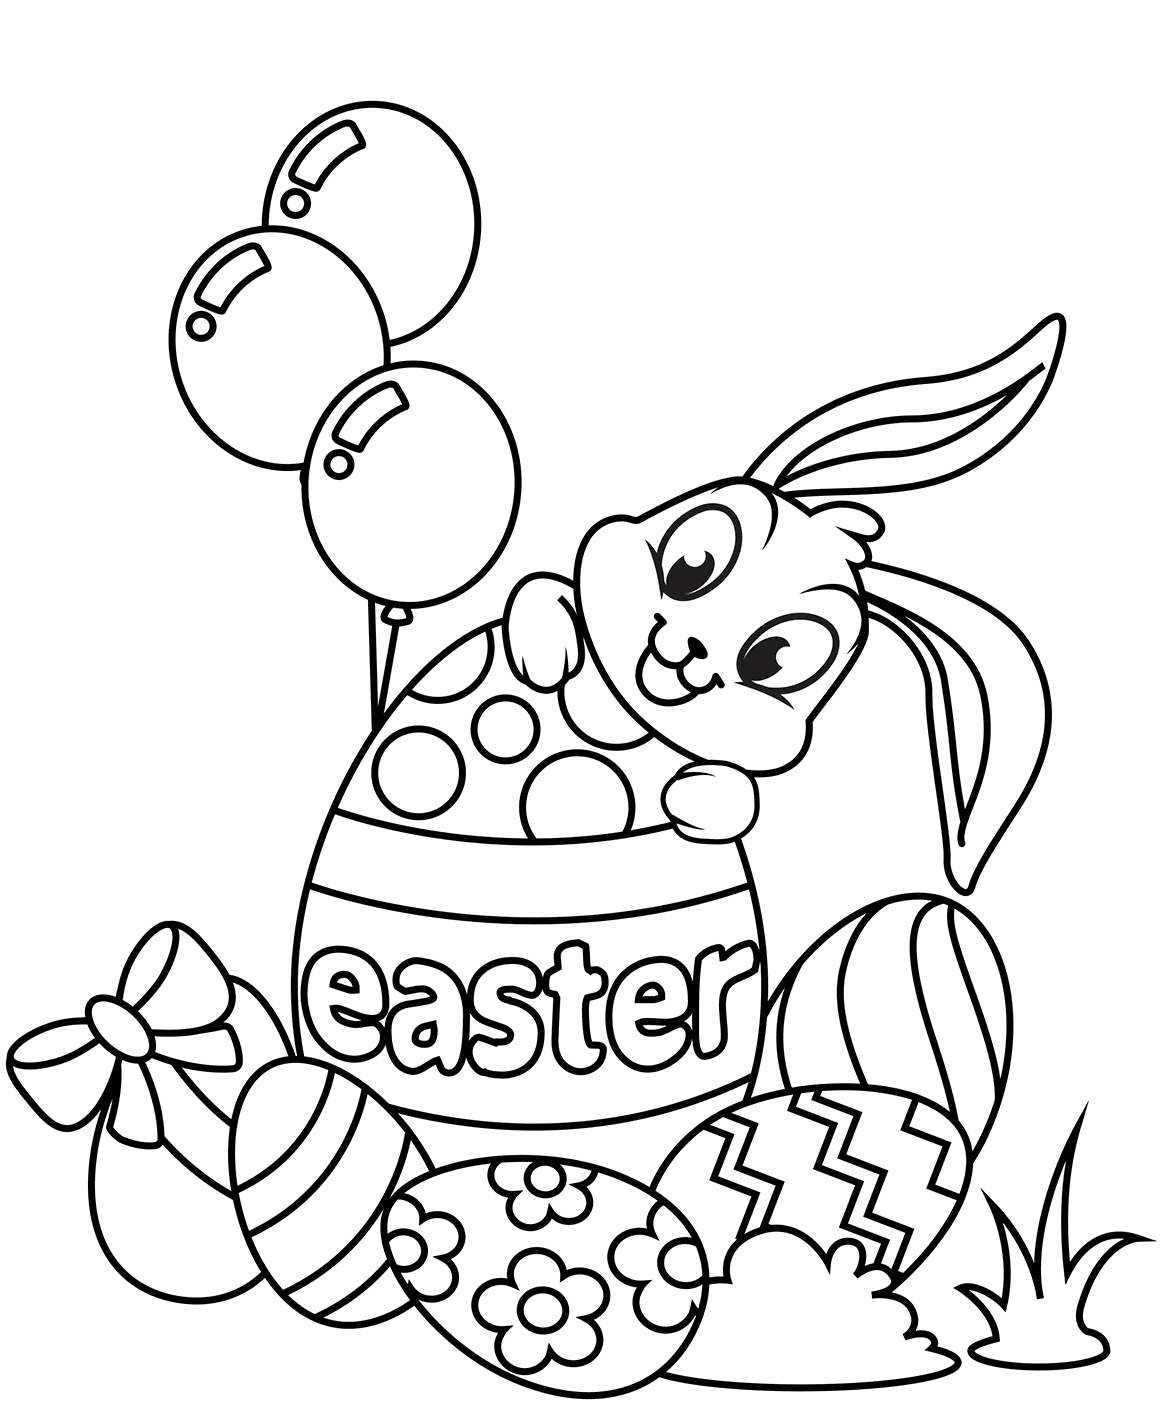 printable-coloring-pages-easter-bunny